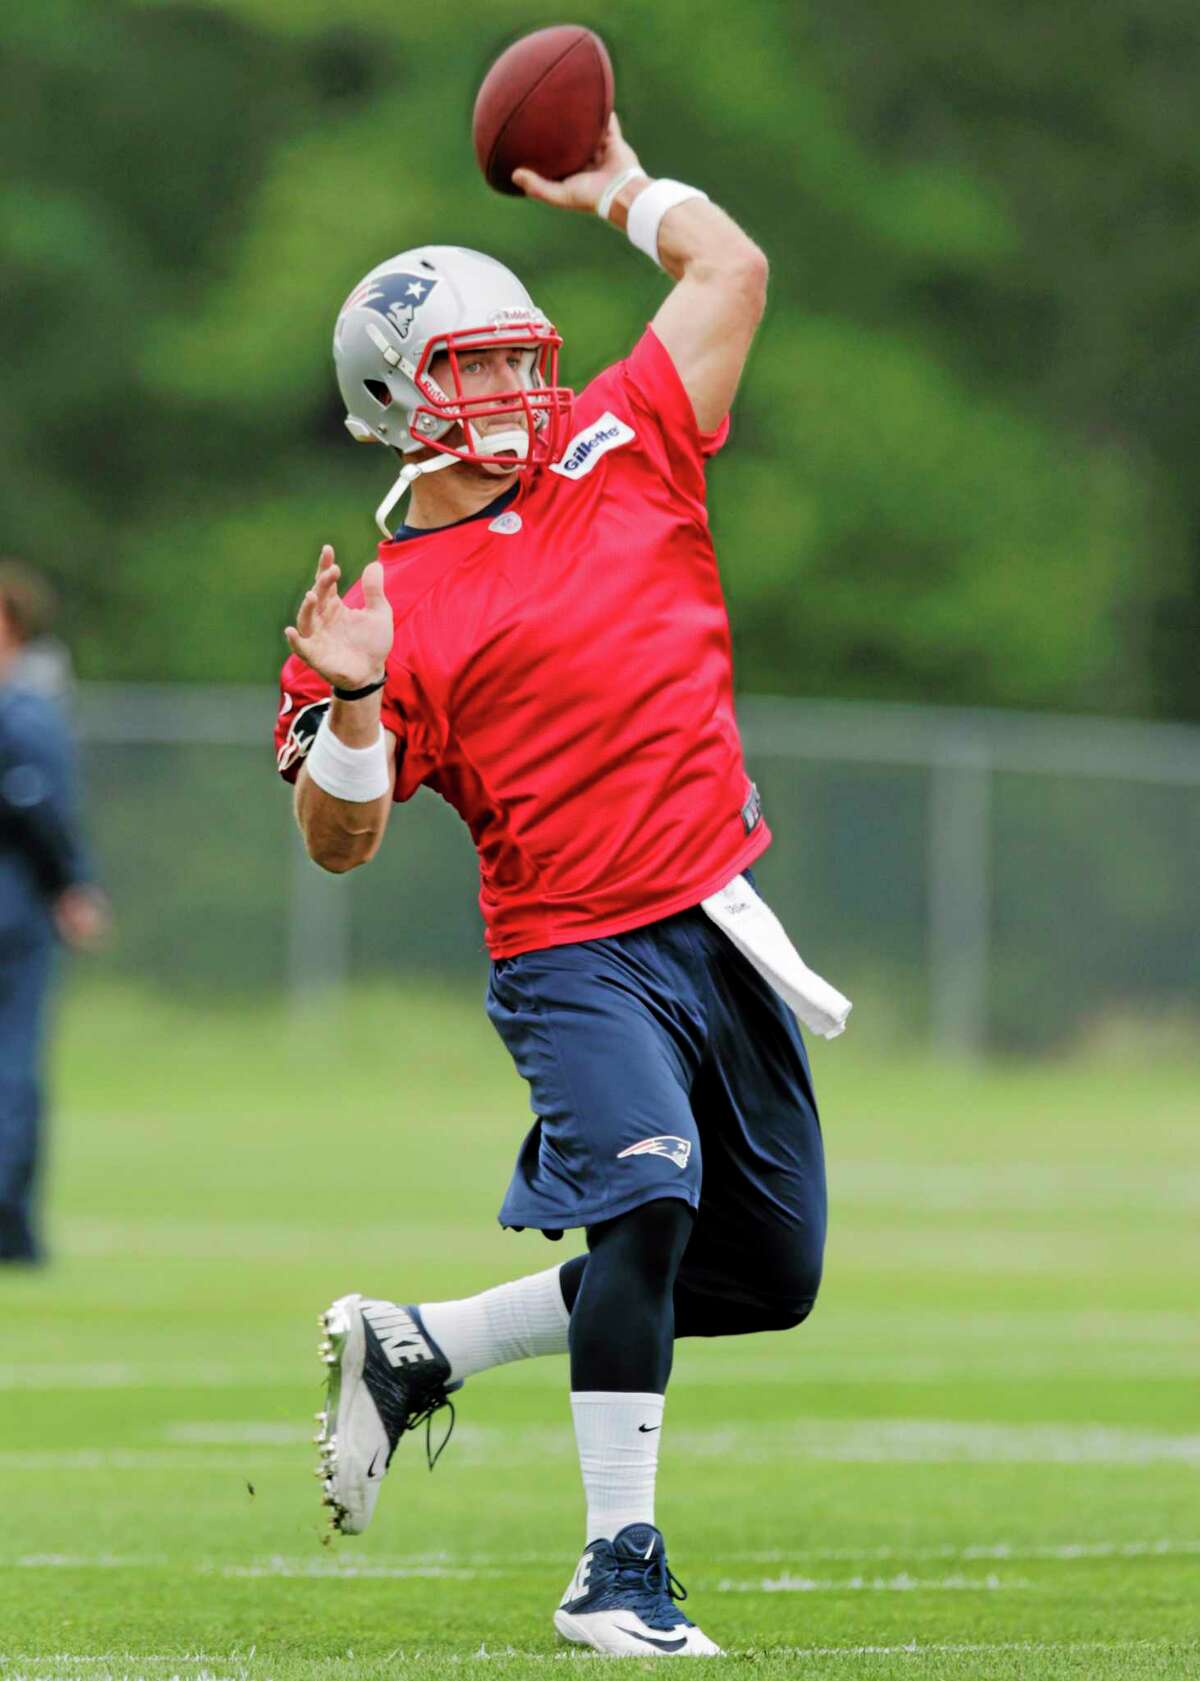 Quarterback Tim Tebow of the New England Patriots at Foxborough, Mass., this year. (AP Photo/Charles Krupa)